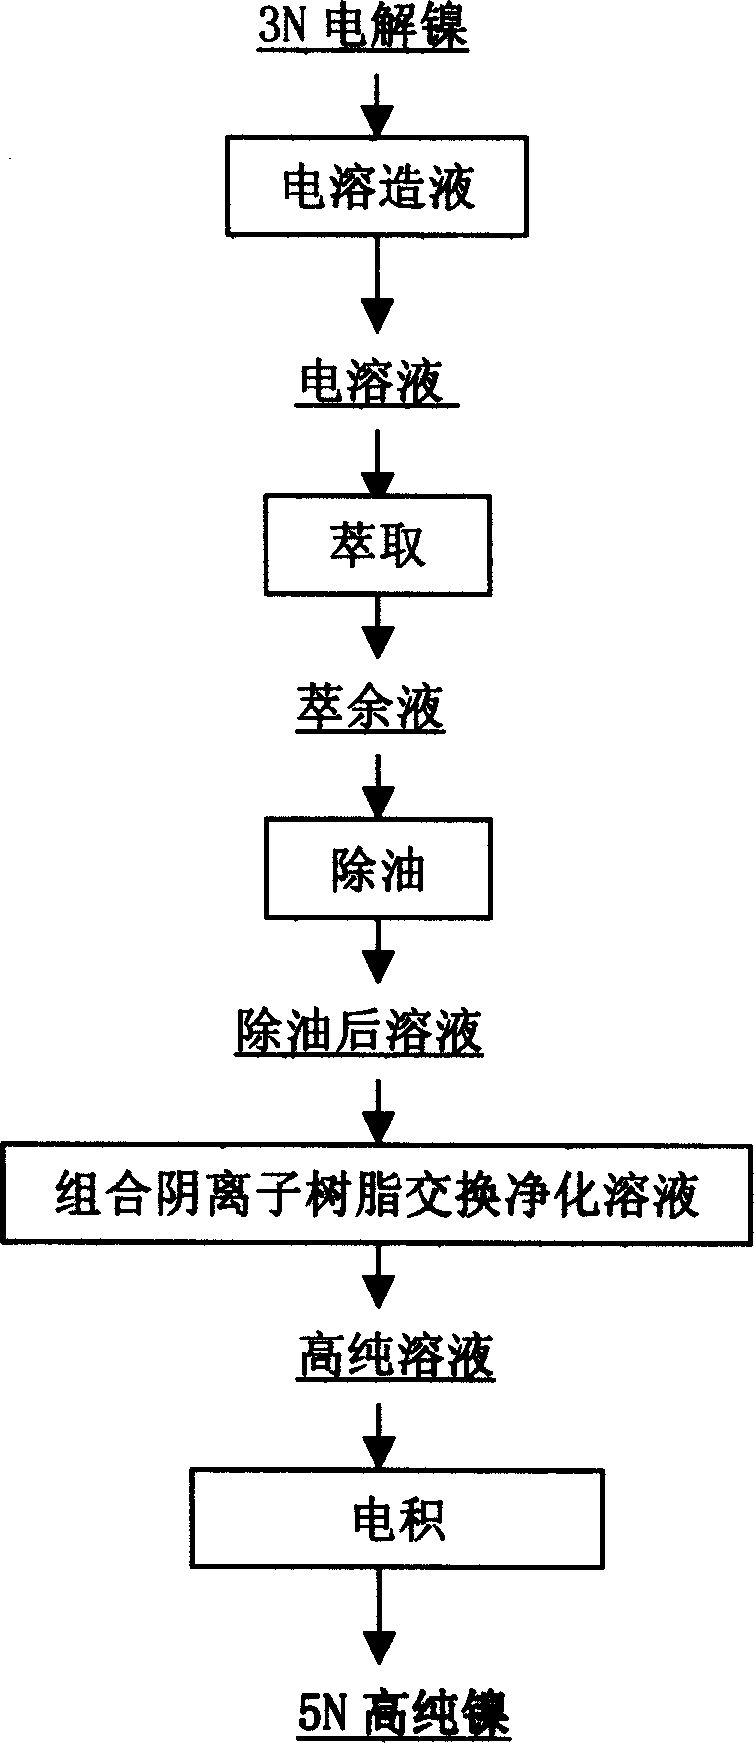 Process for preparing high purity nickel